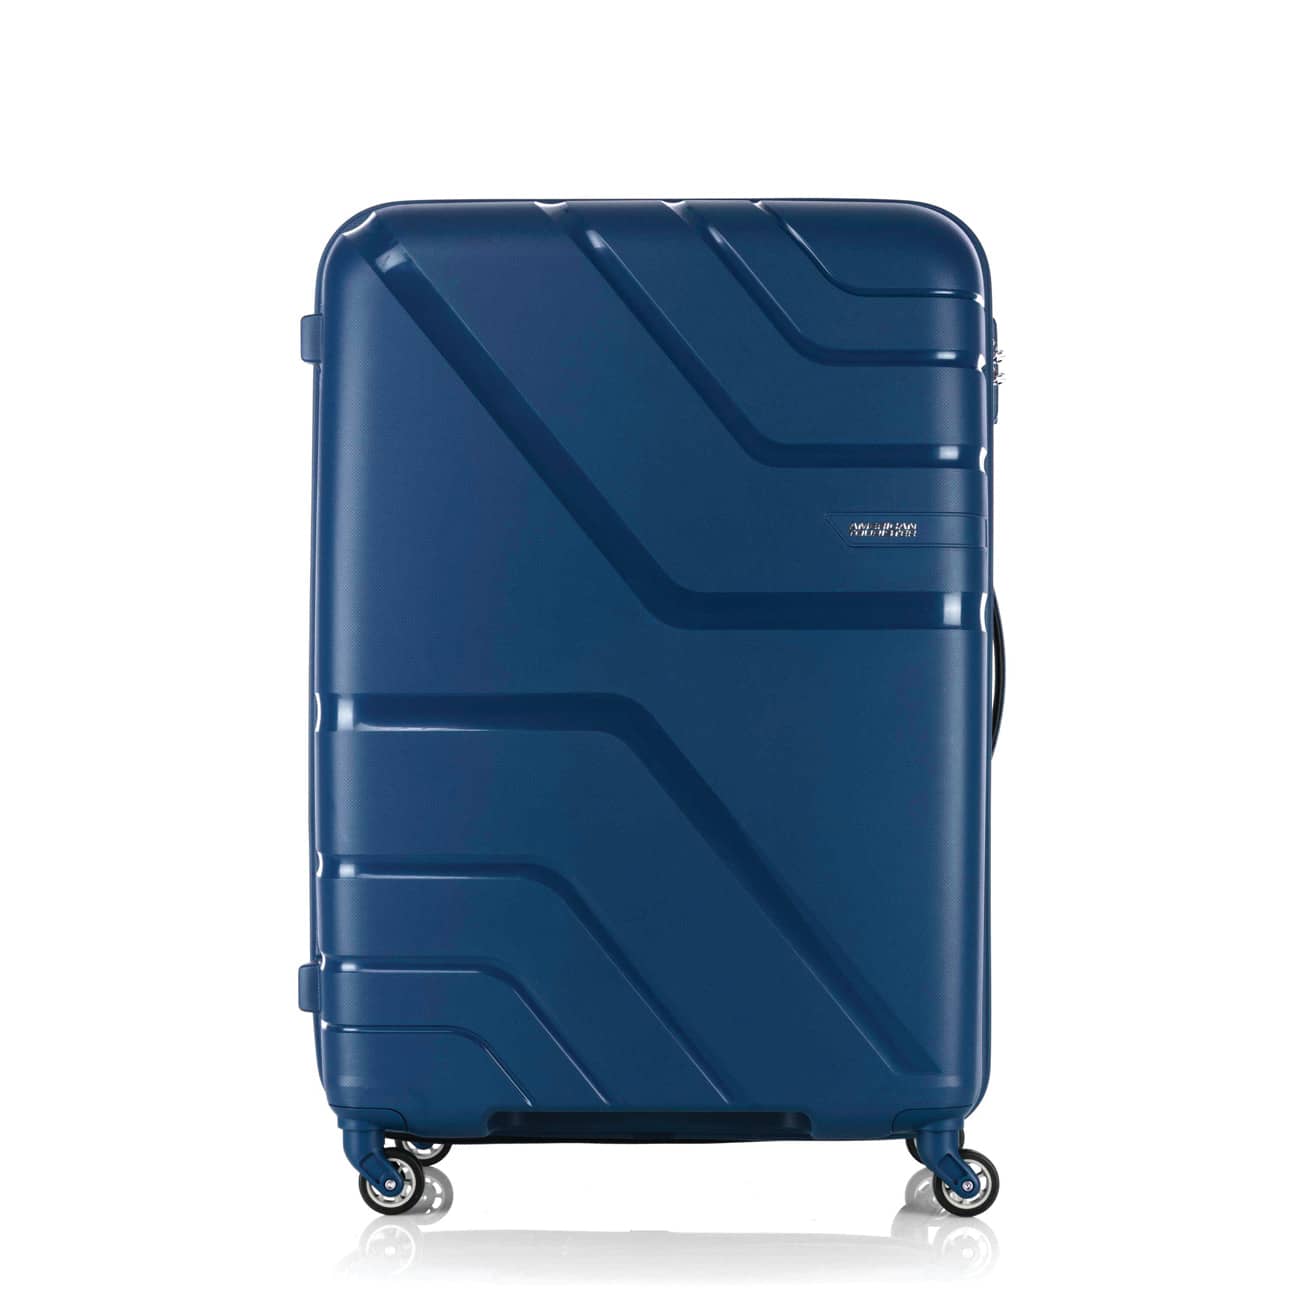 Best Affordable Suitcase